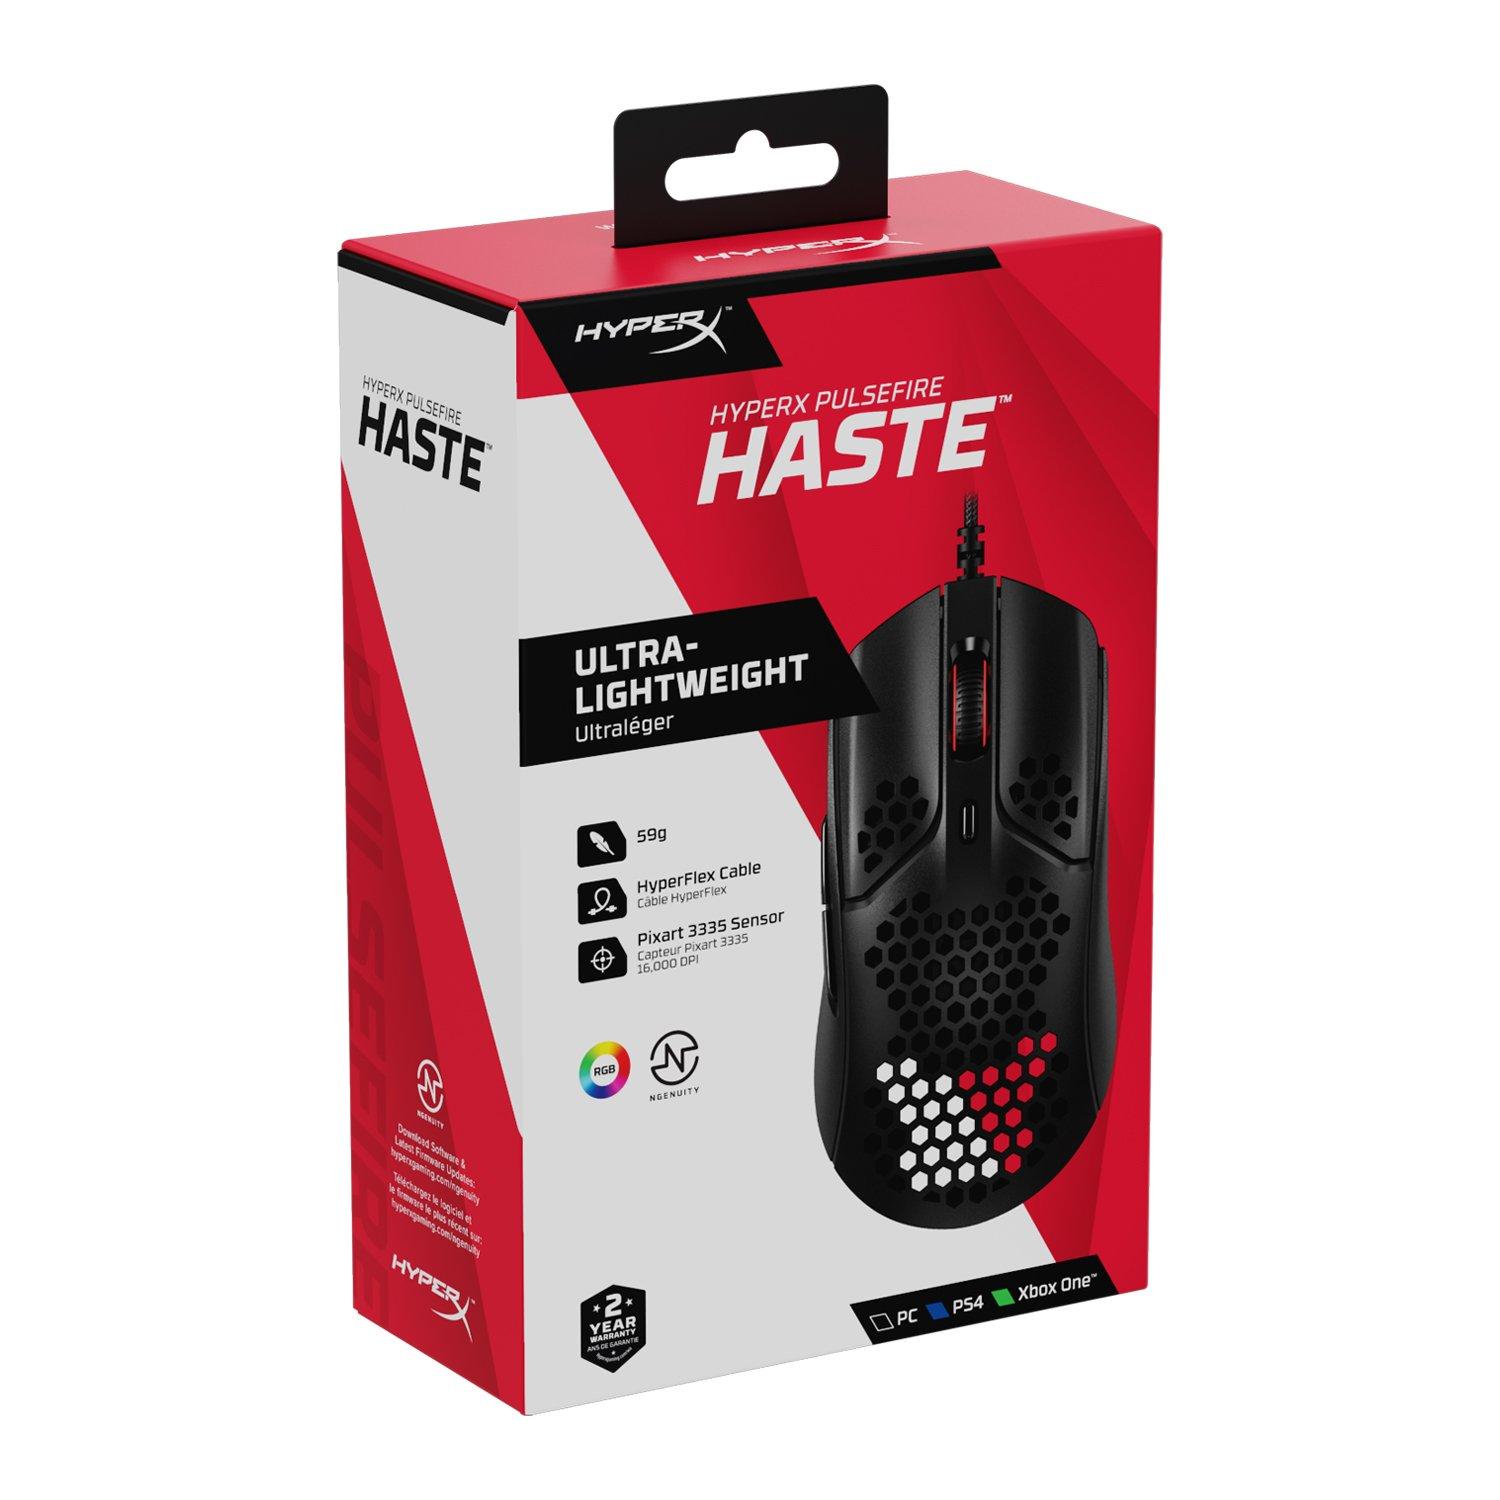 HyperX Pulsefire Haste Wireless gaming mouse review – Ride the